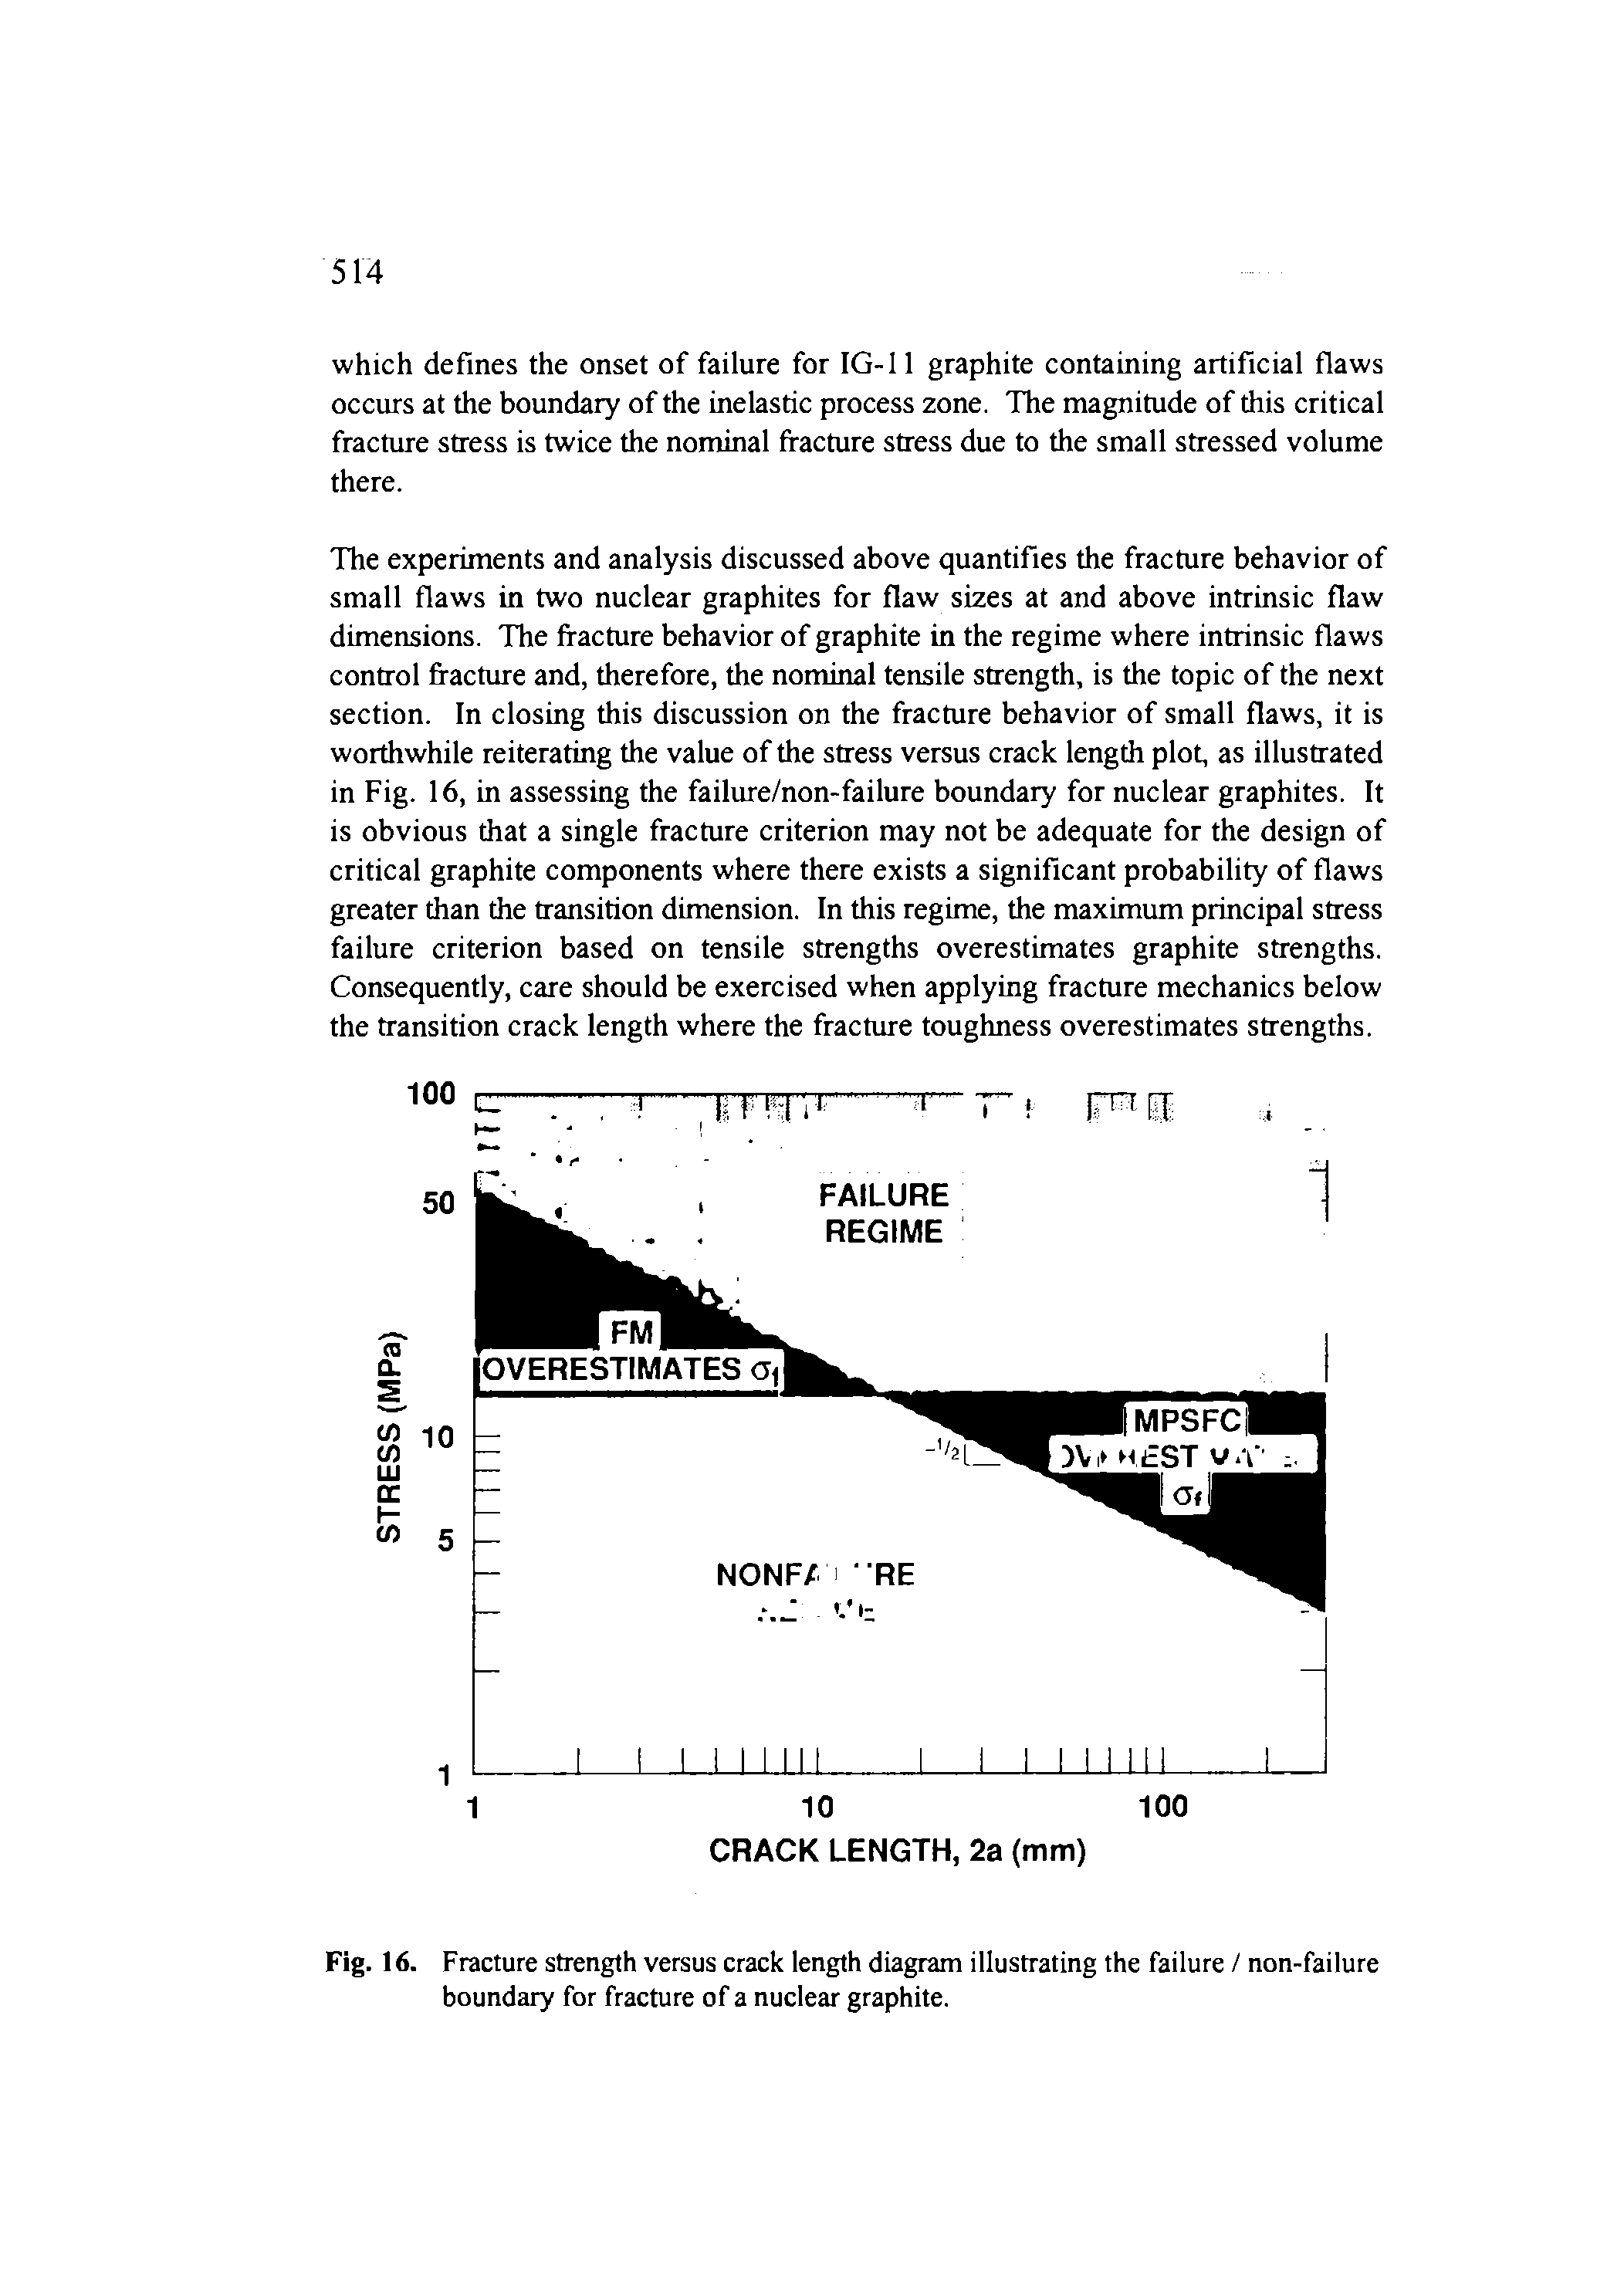 Fig. 16. Fracture strength versus crack length diagram illustrating the failure / non-failure boundary for fracture of a nuclear graphite.